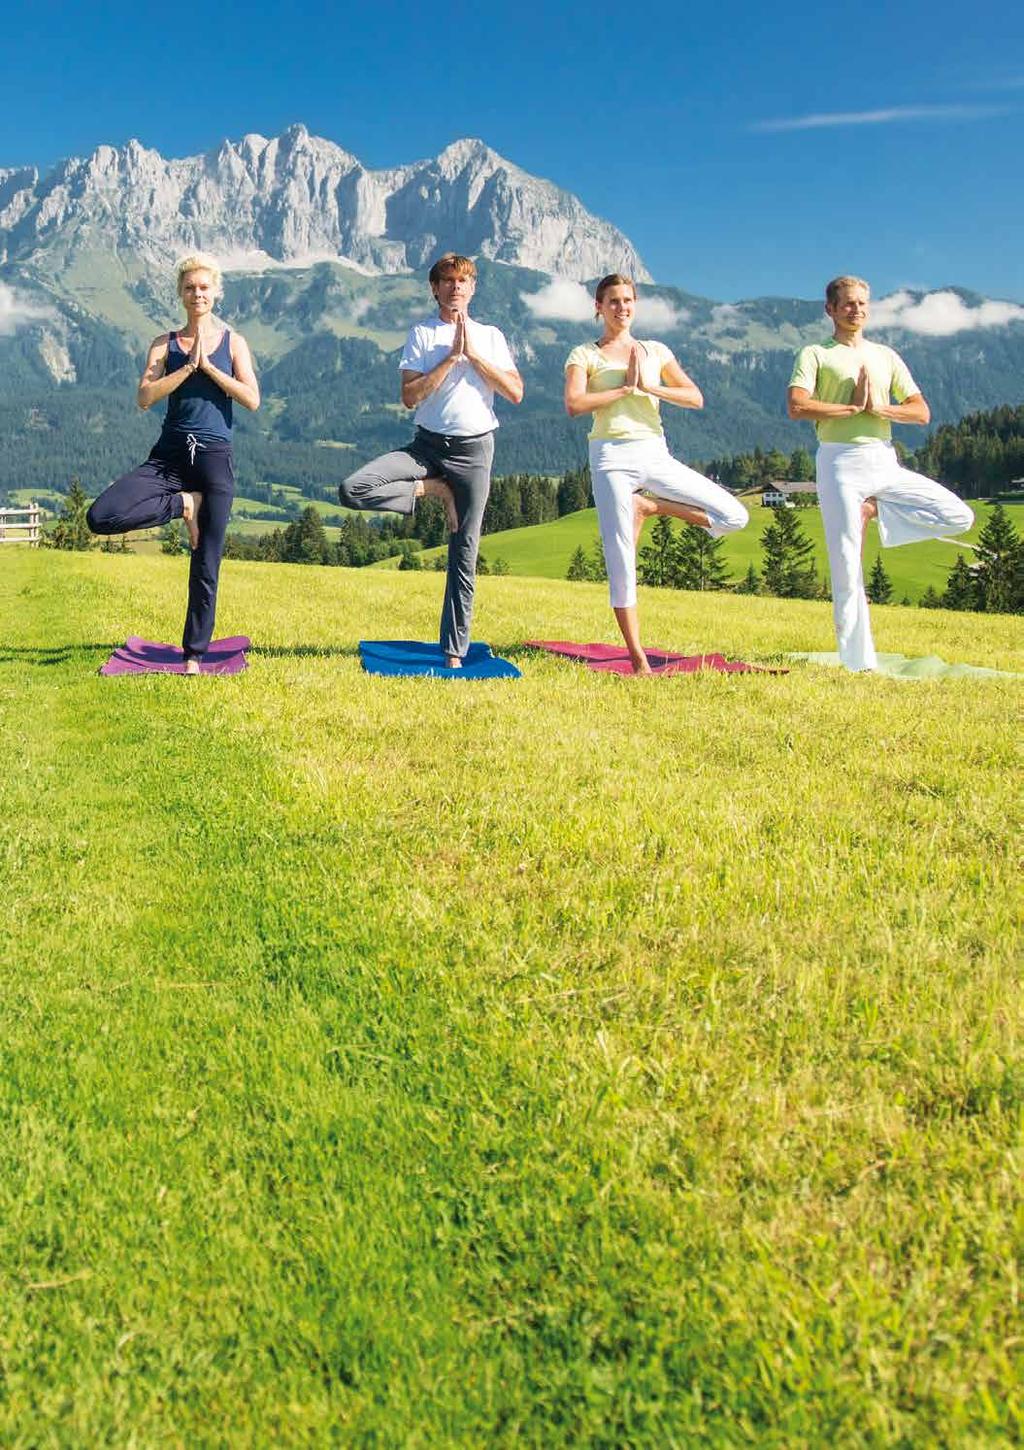 Photo: Kitzbühel Tourismus/Thilo Brunner JANUARY 26 2017 Calendar Choose from two alpine oases for your yoga vacation: Reith, Tyrol, Austria: open nearly all year round.